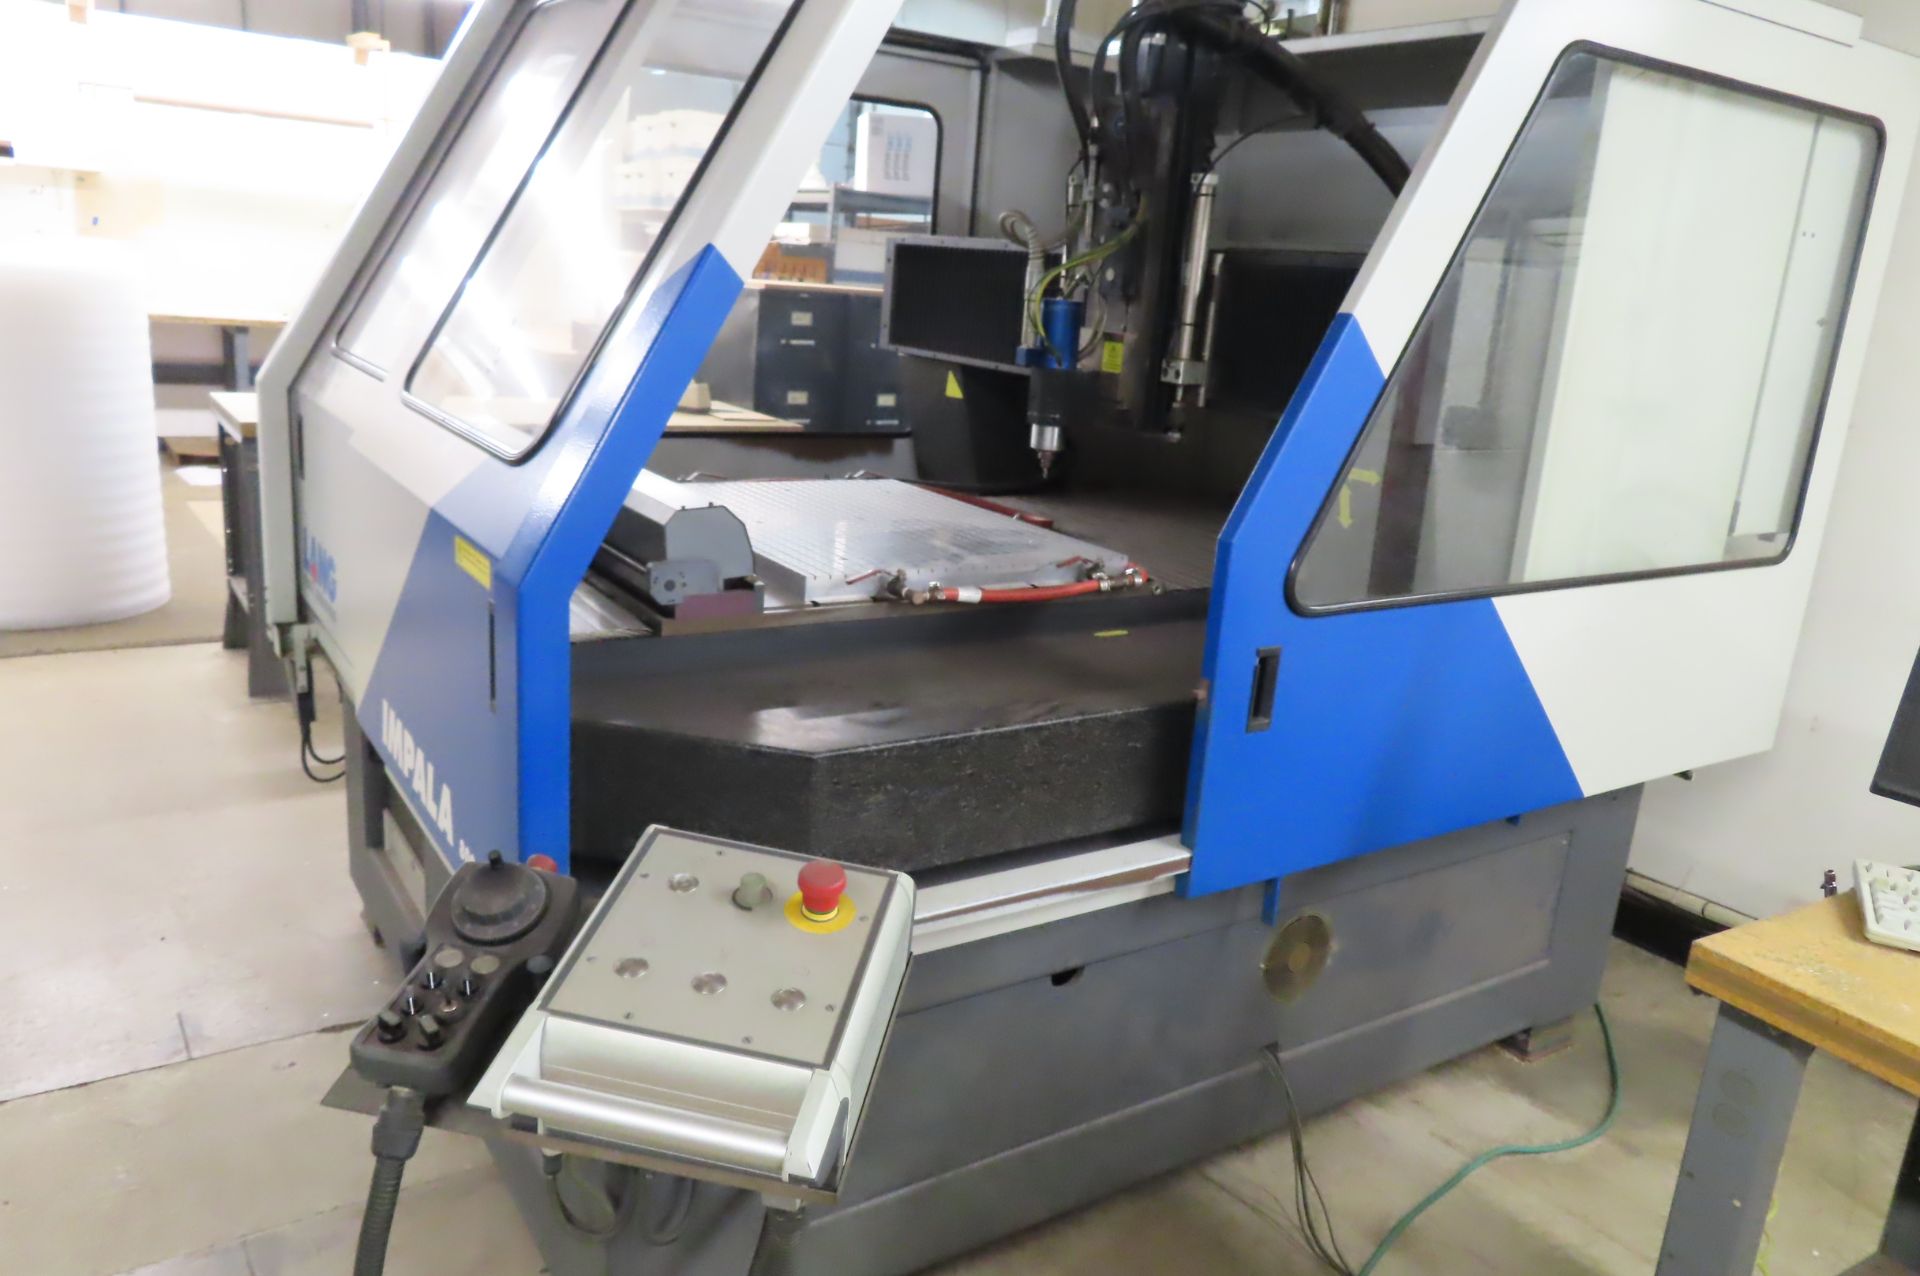 2007 LANG IMPALA 800 CNC ENGRAVING AND MILLING MACHINE, S/N 0709-H530-58, 3 AXIS, X-31 IN... - Image 8 of 16